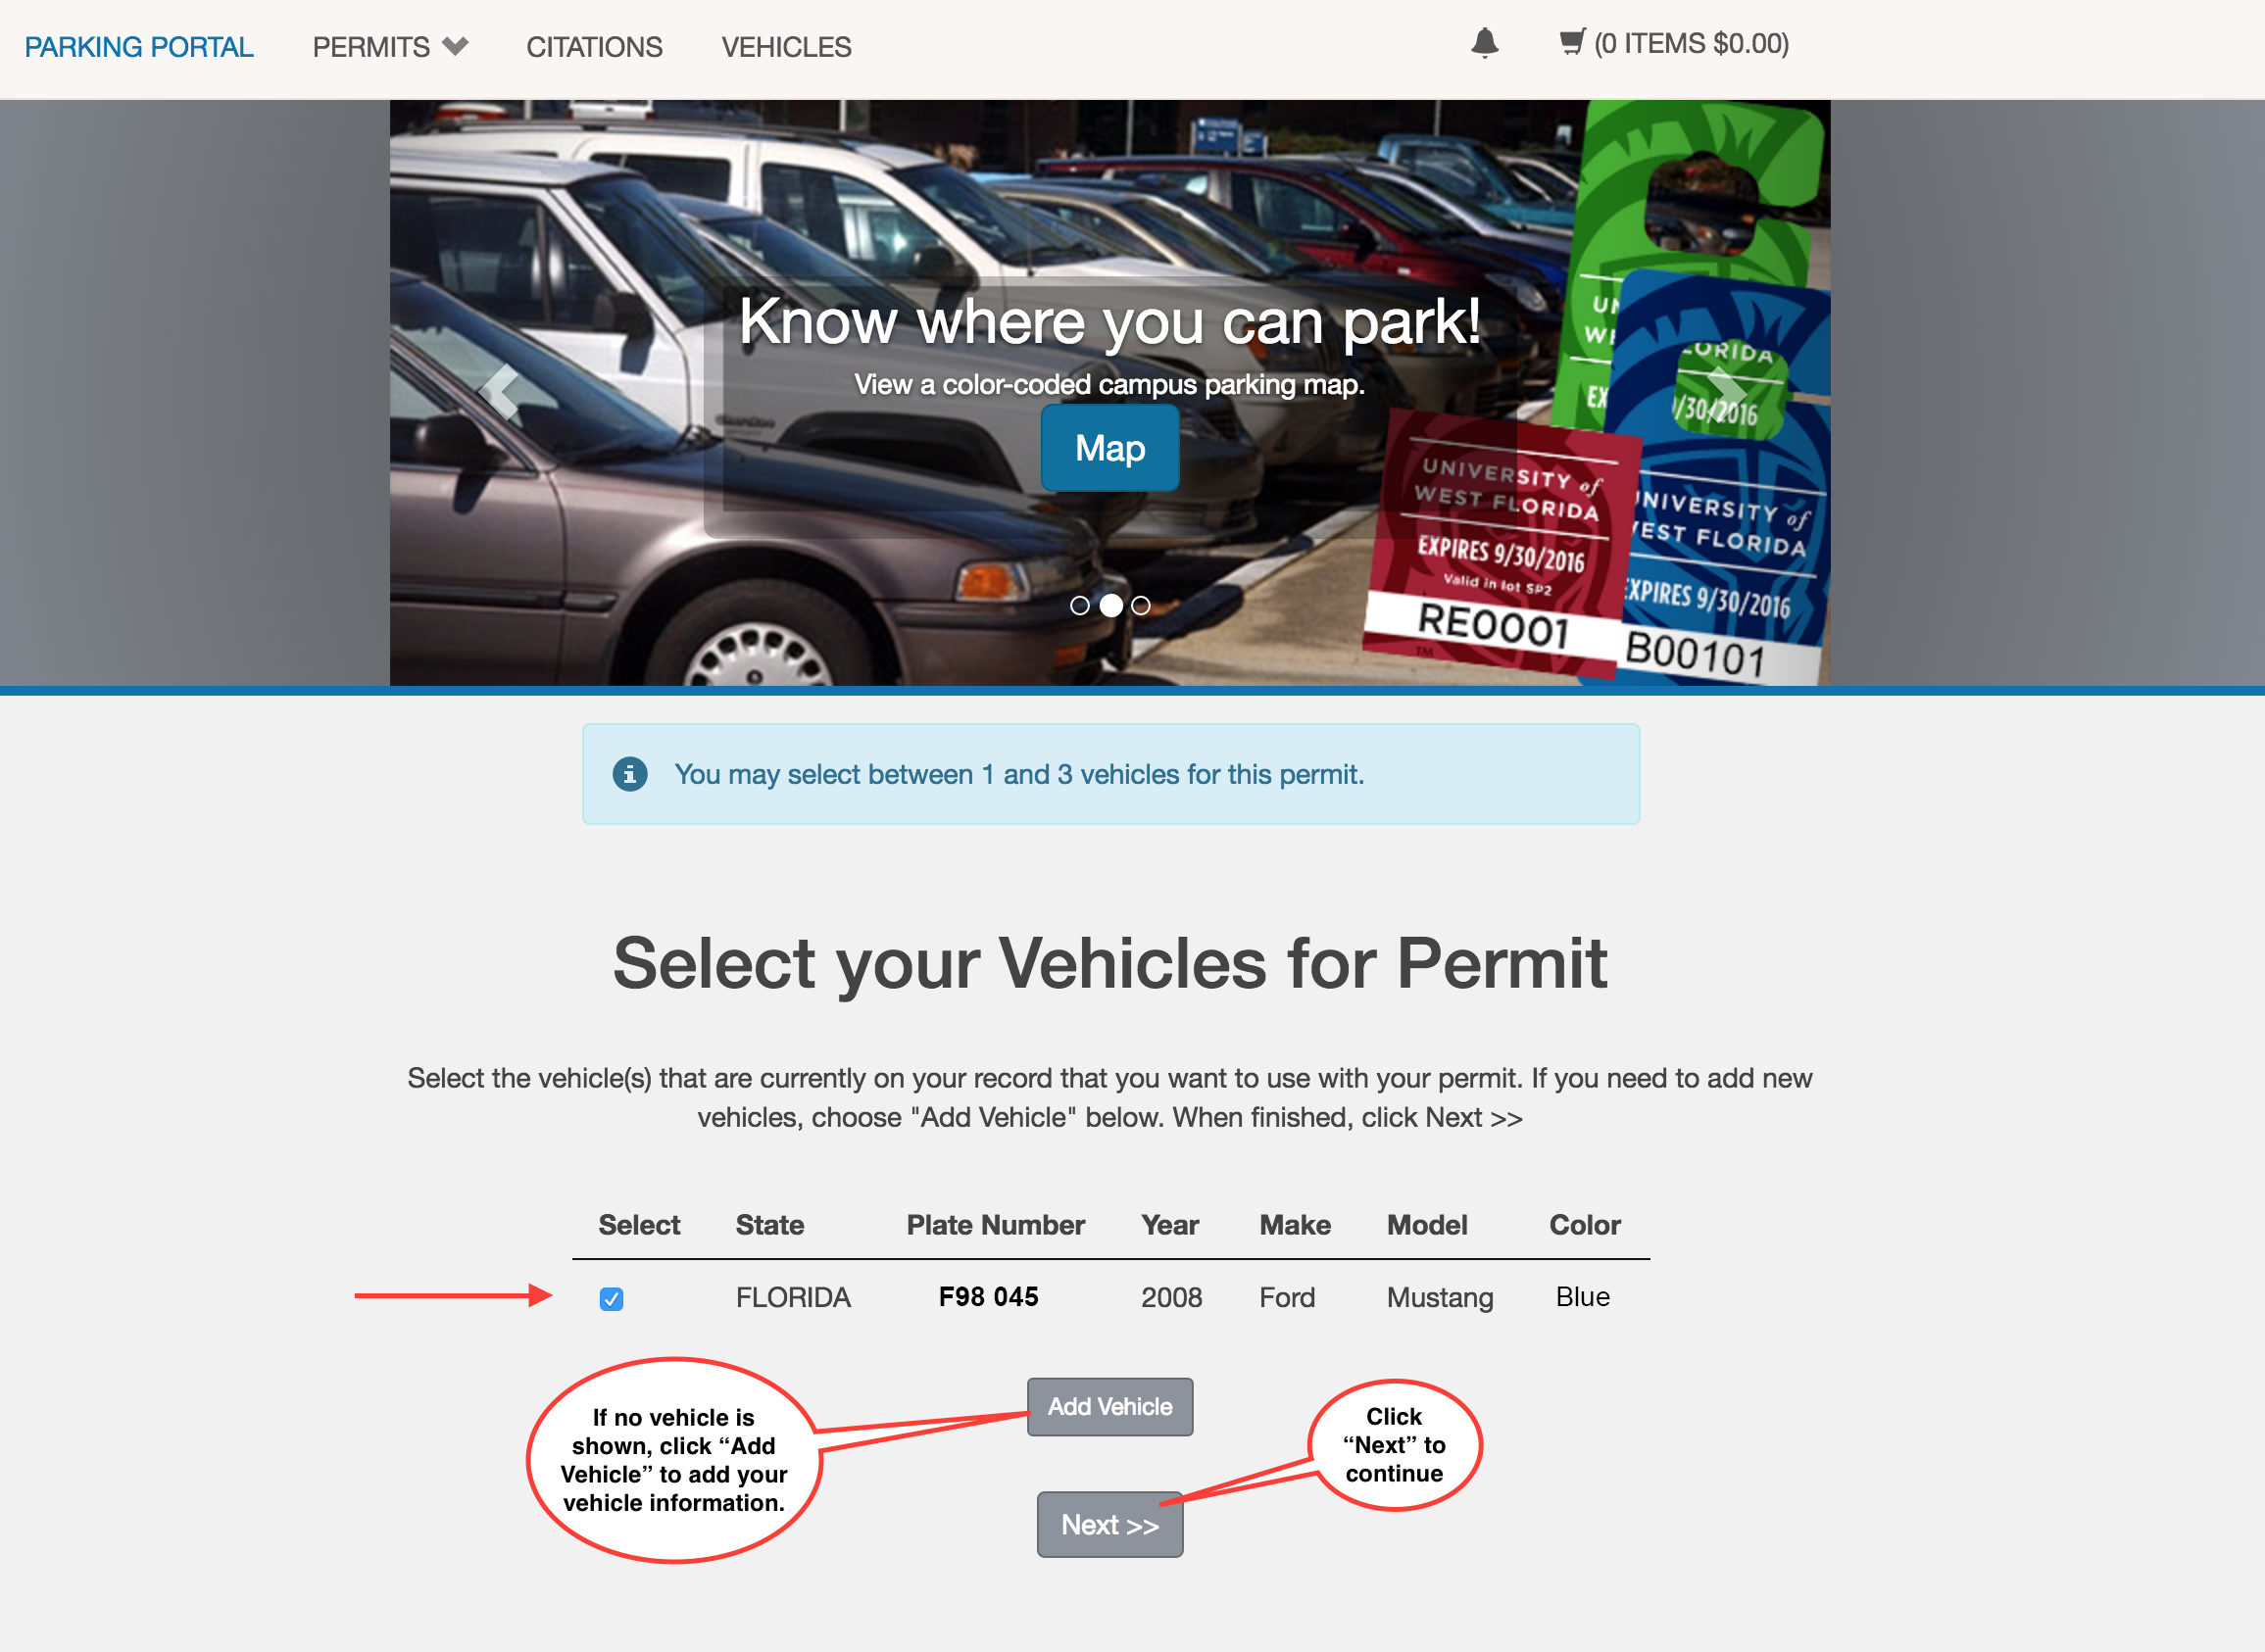 Select vehicles for permit